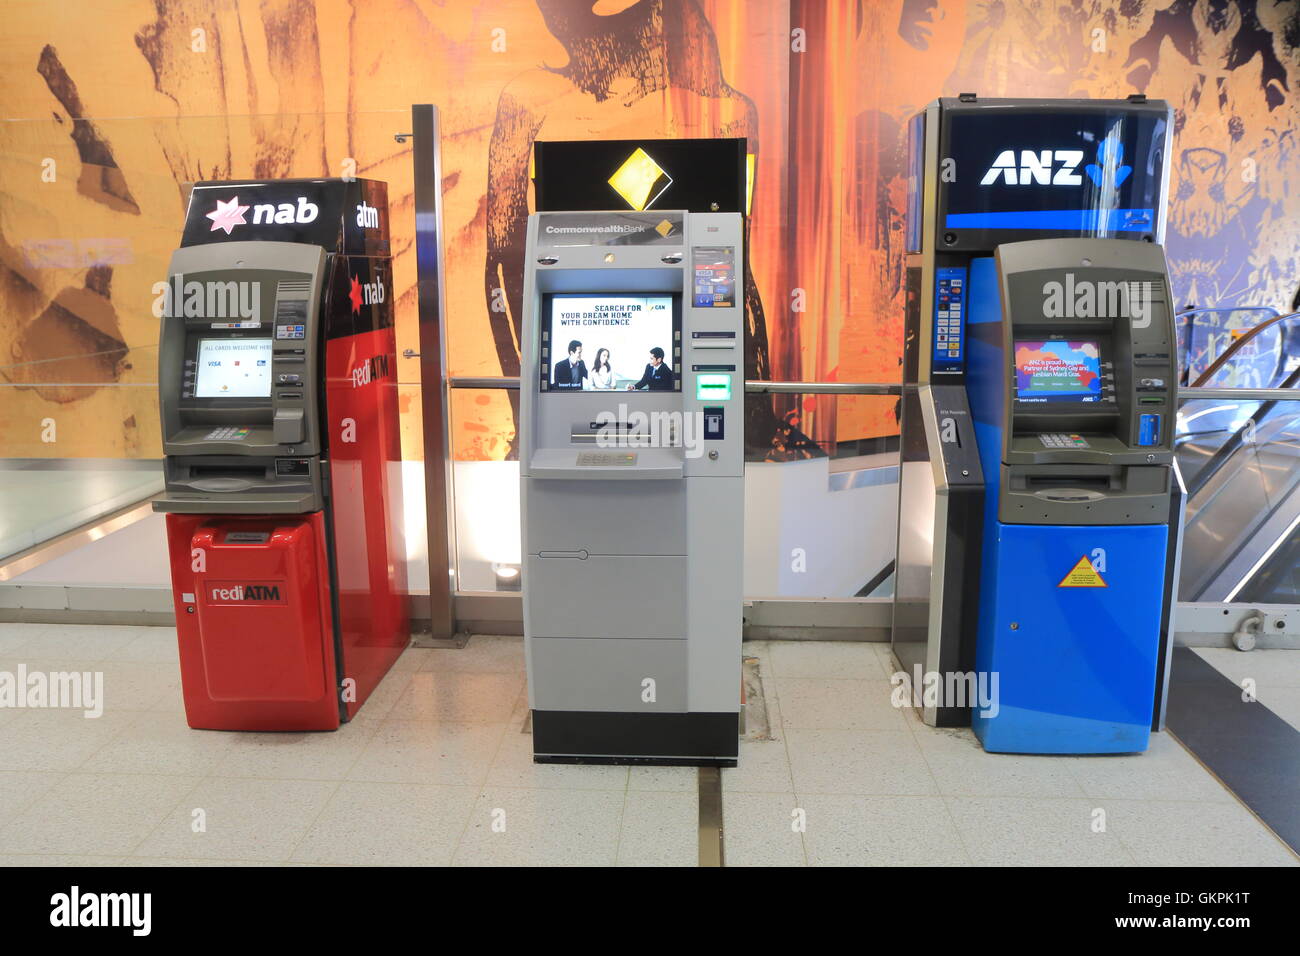 How To Buy An Atm In Australia / Starting A Passive Atm ...